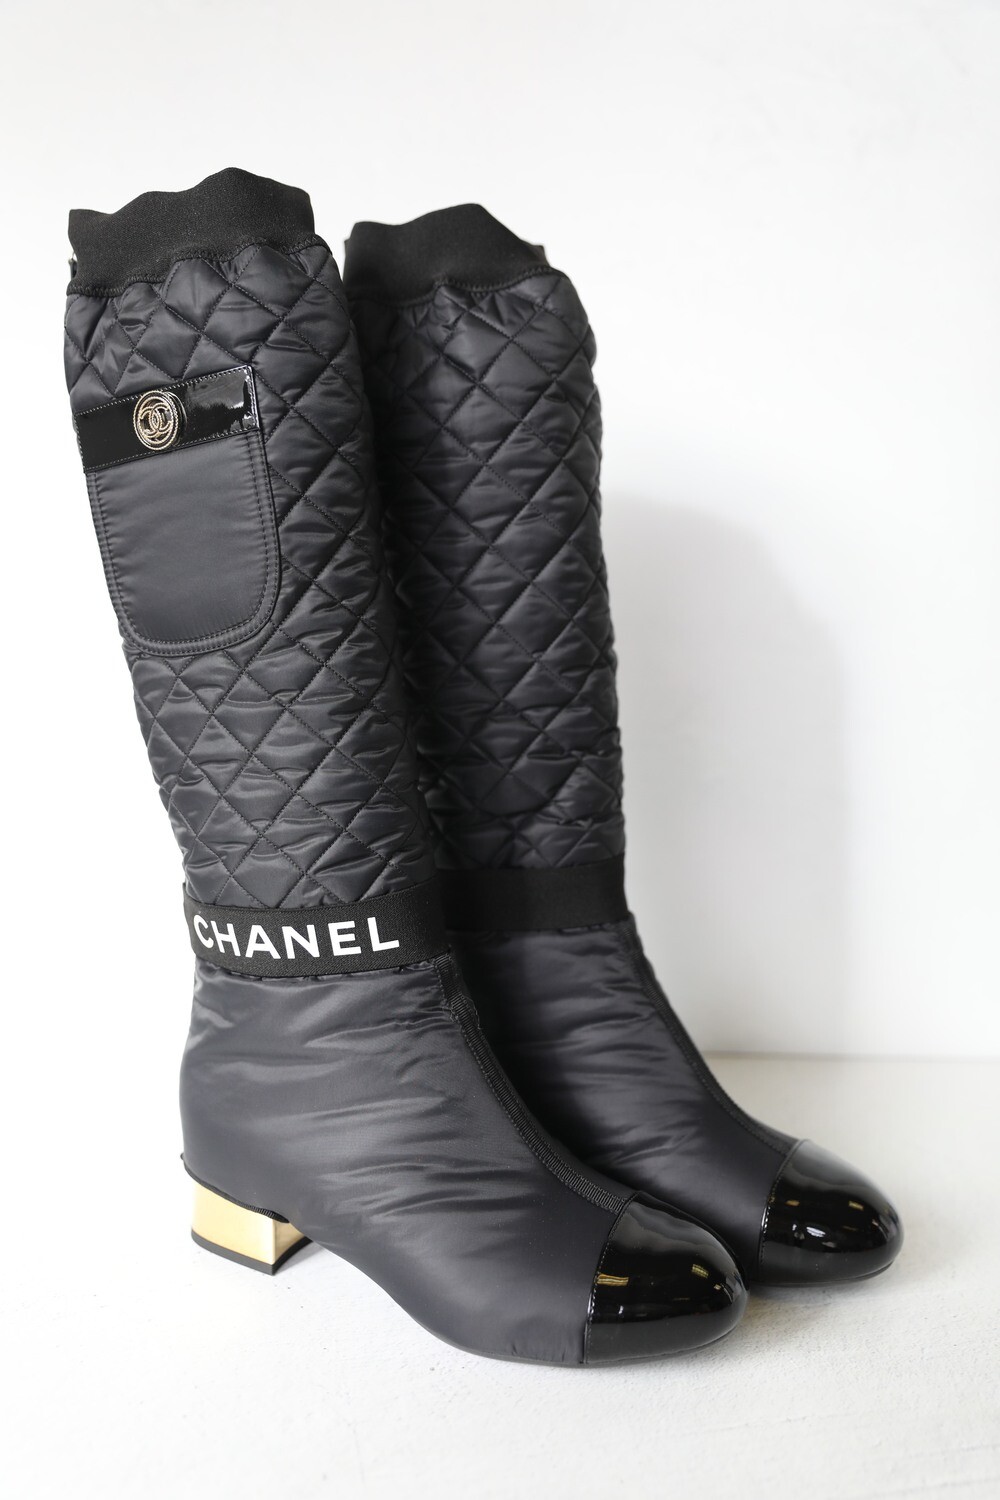 CHANEL, Shoes, Chanel Boots Women